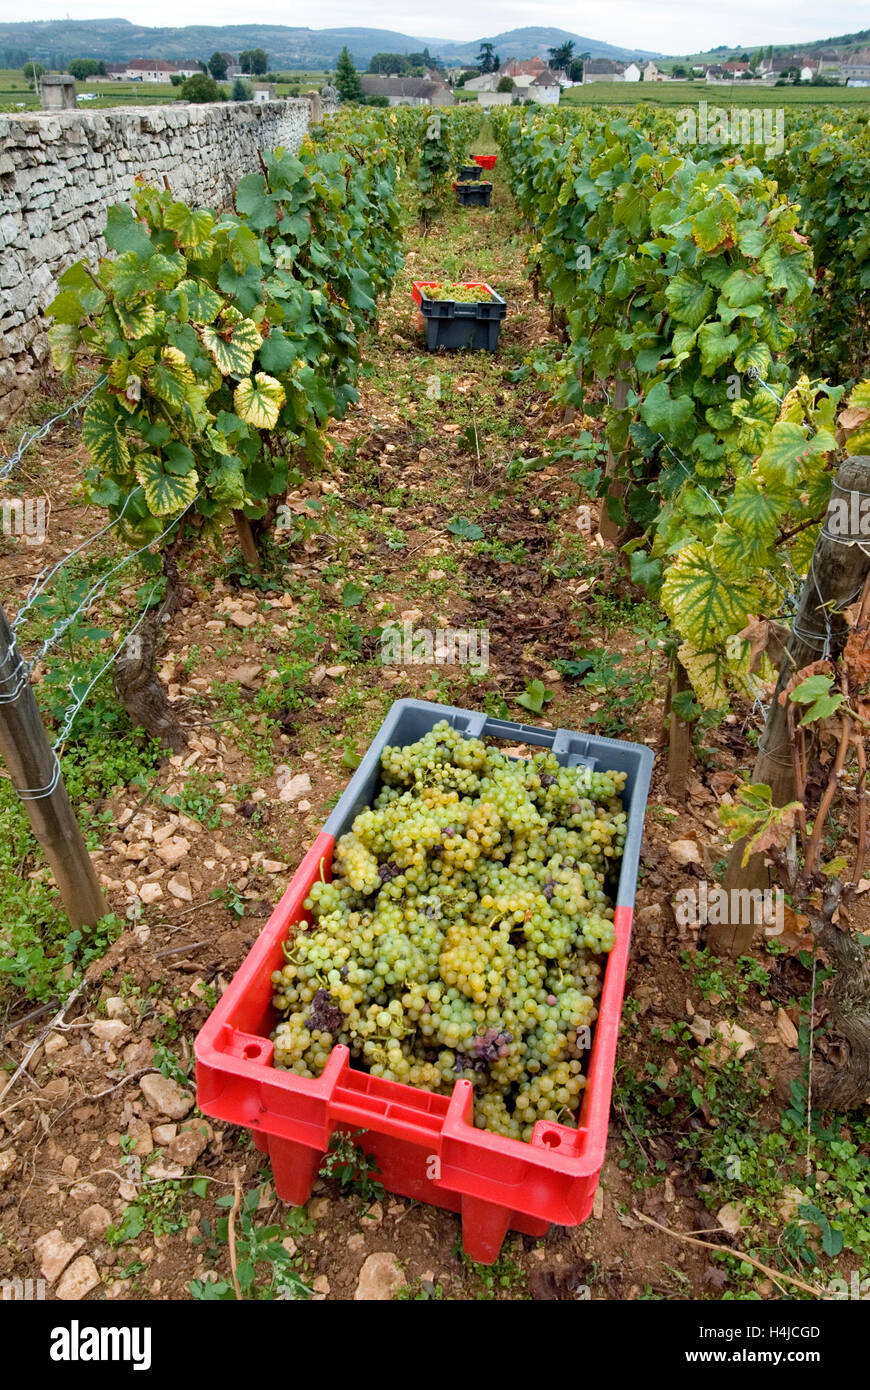 MONTRACHET GRAND CRU harvested Chardonnay grapes in containers in the Domaine Leflaive parcel of Le Montrachet vineyard of Anne-Claude Leflaive Stock Photo